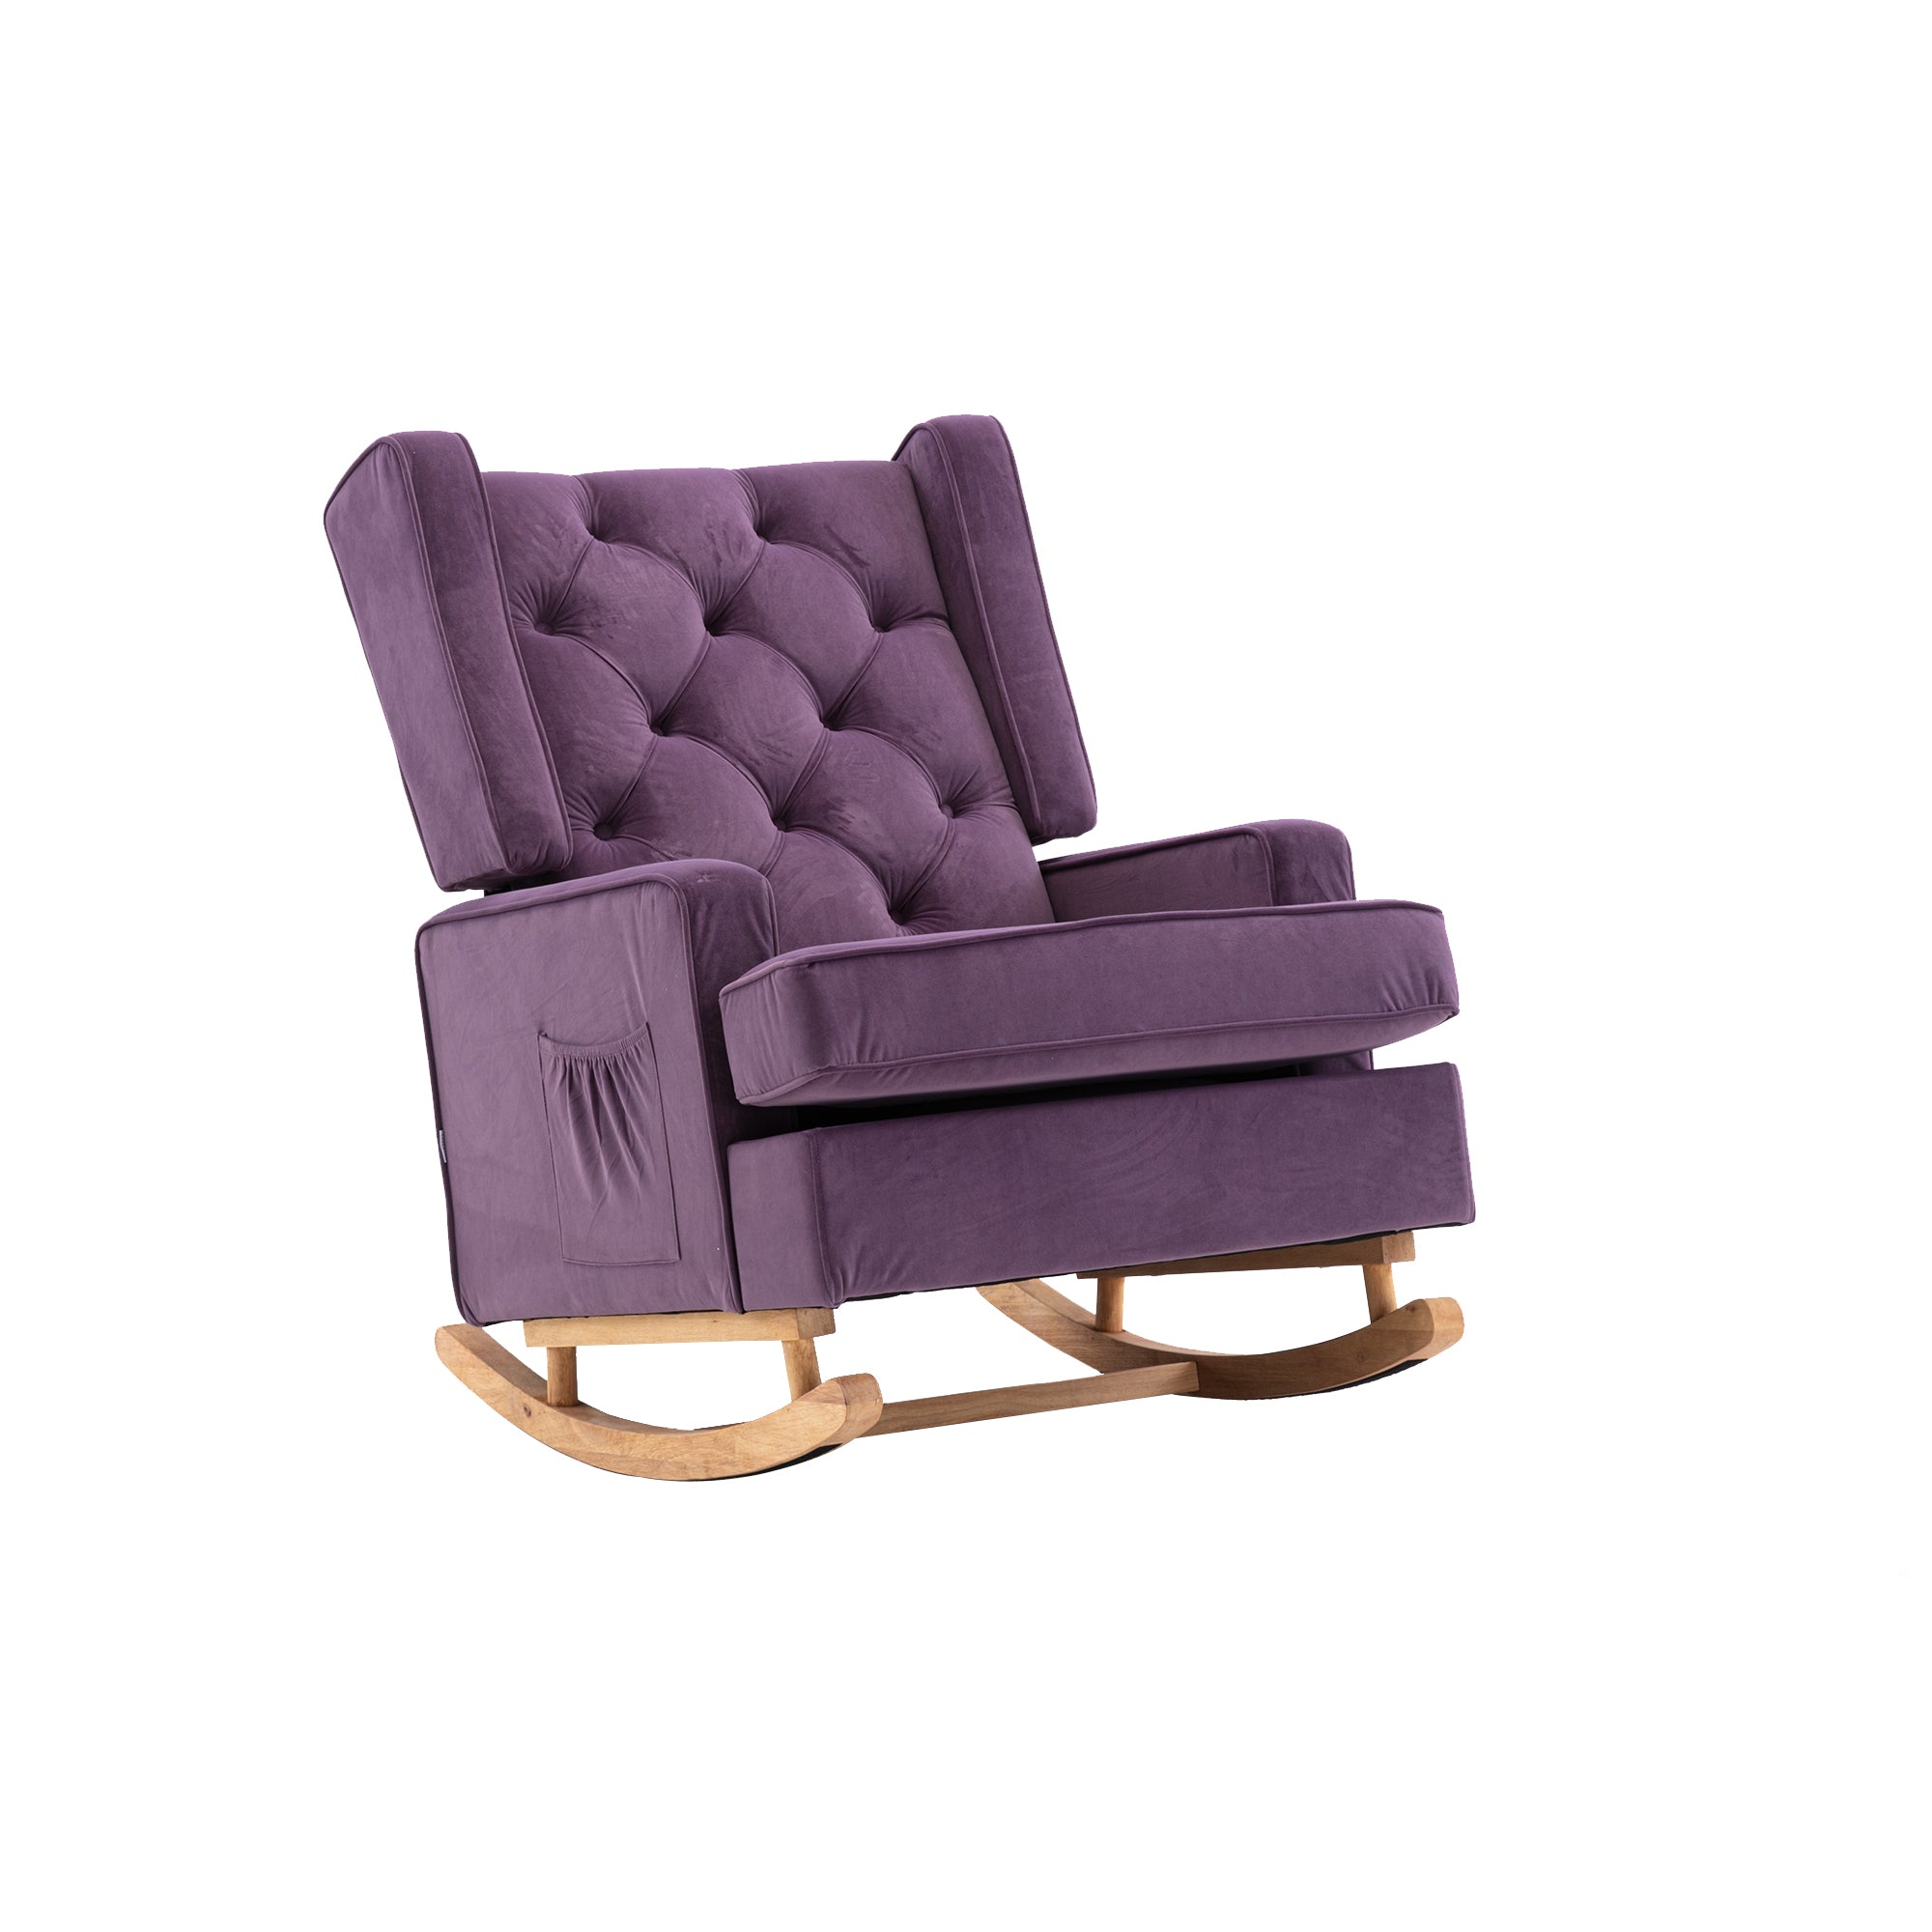 COOLMORE living room Comfortable rocking chair accent purple-polyester